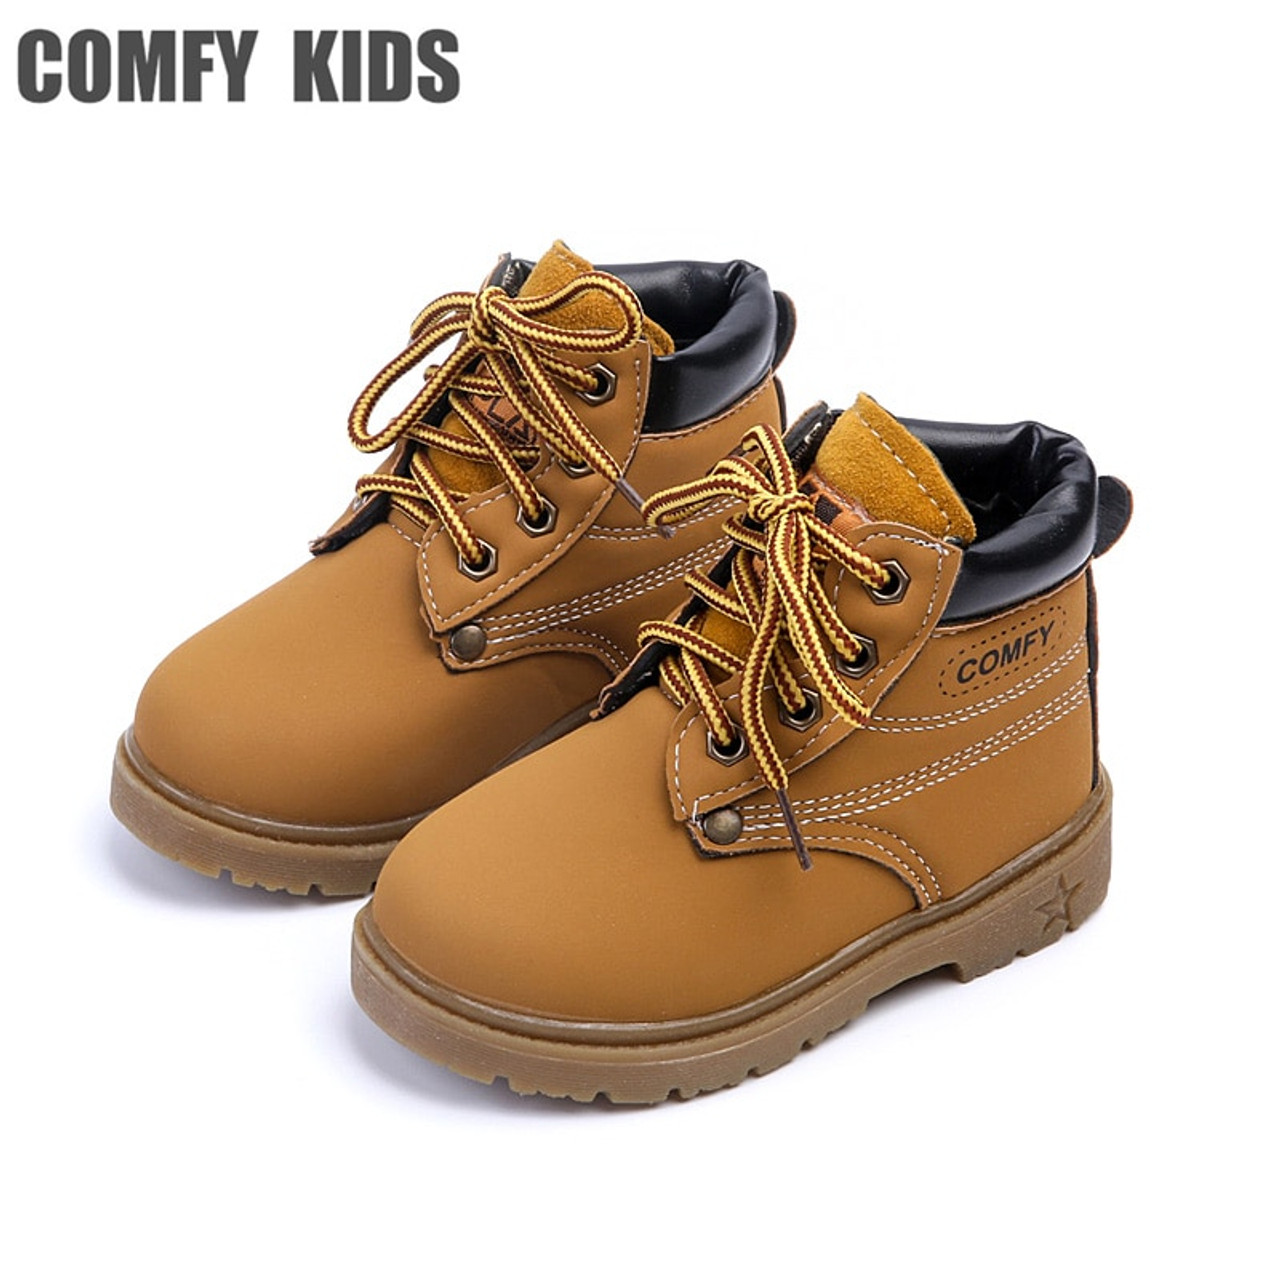 leather boots for toddlers